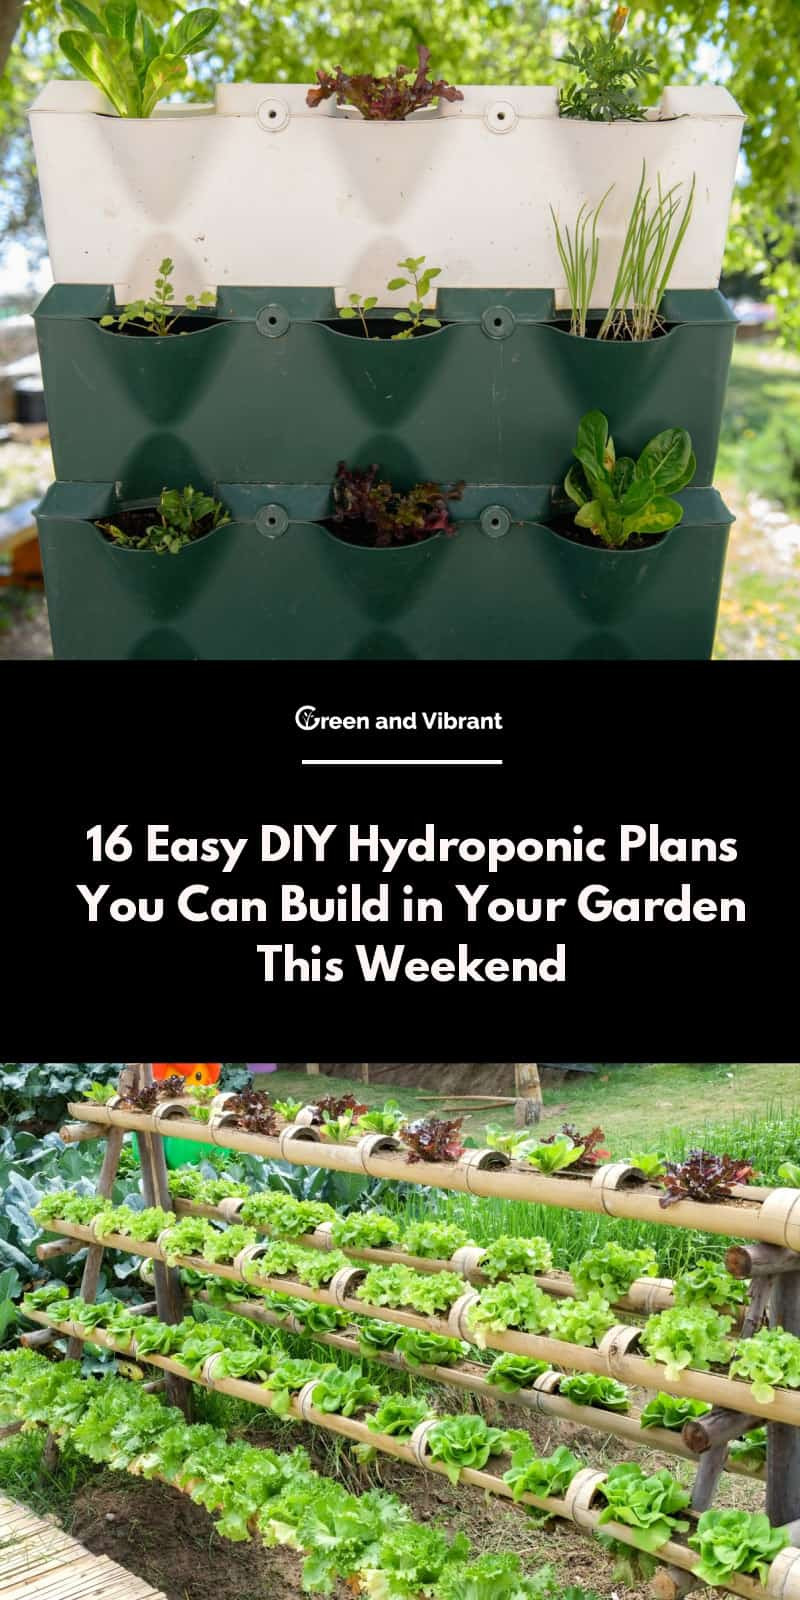 Hydroponics DIY Plans
 16 Easy DIY Hydroponic Plans You Can Build in Your Garden